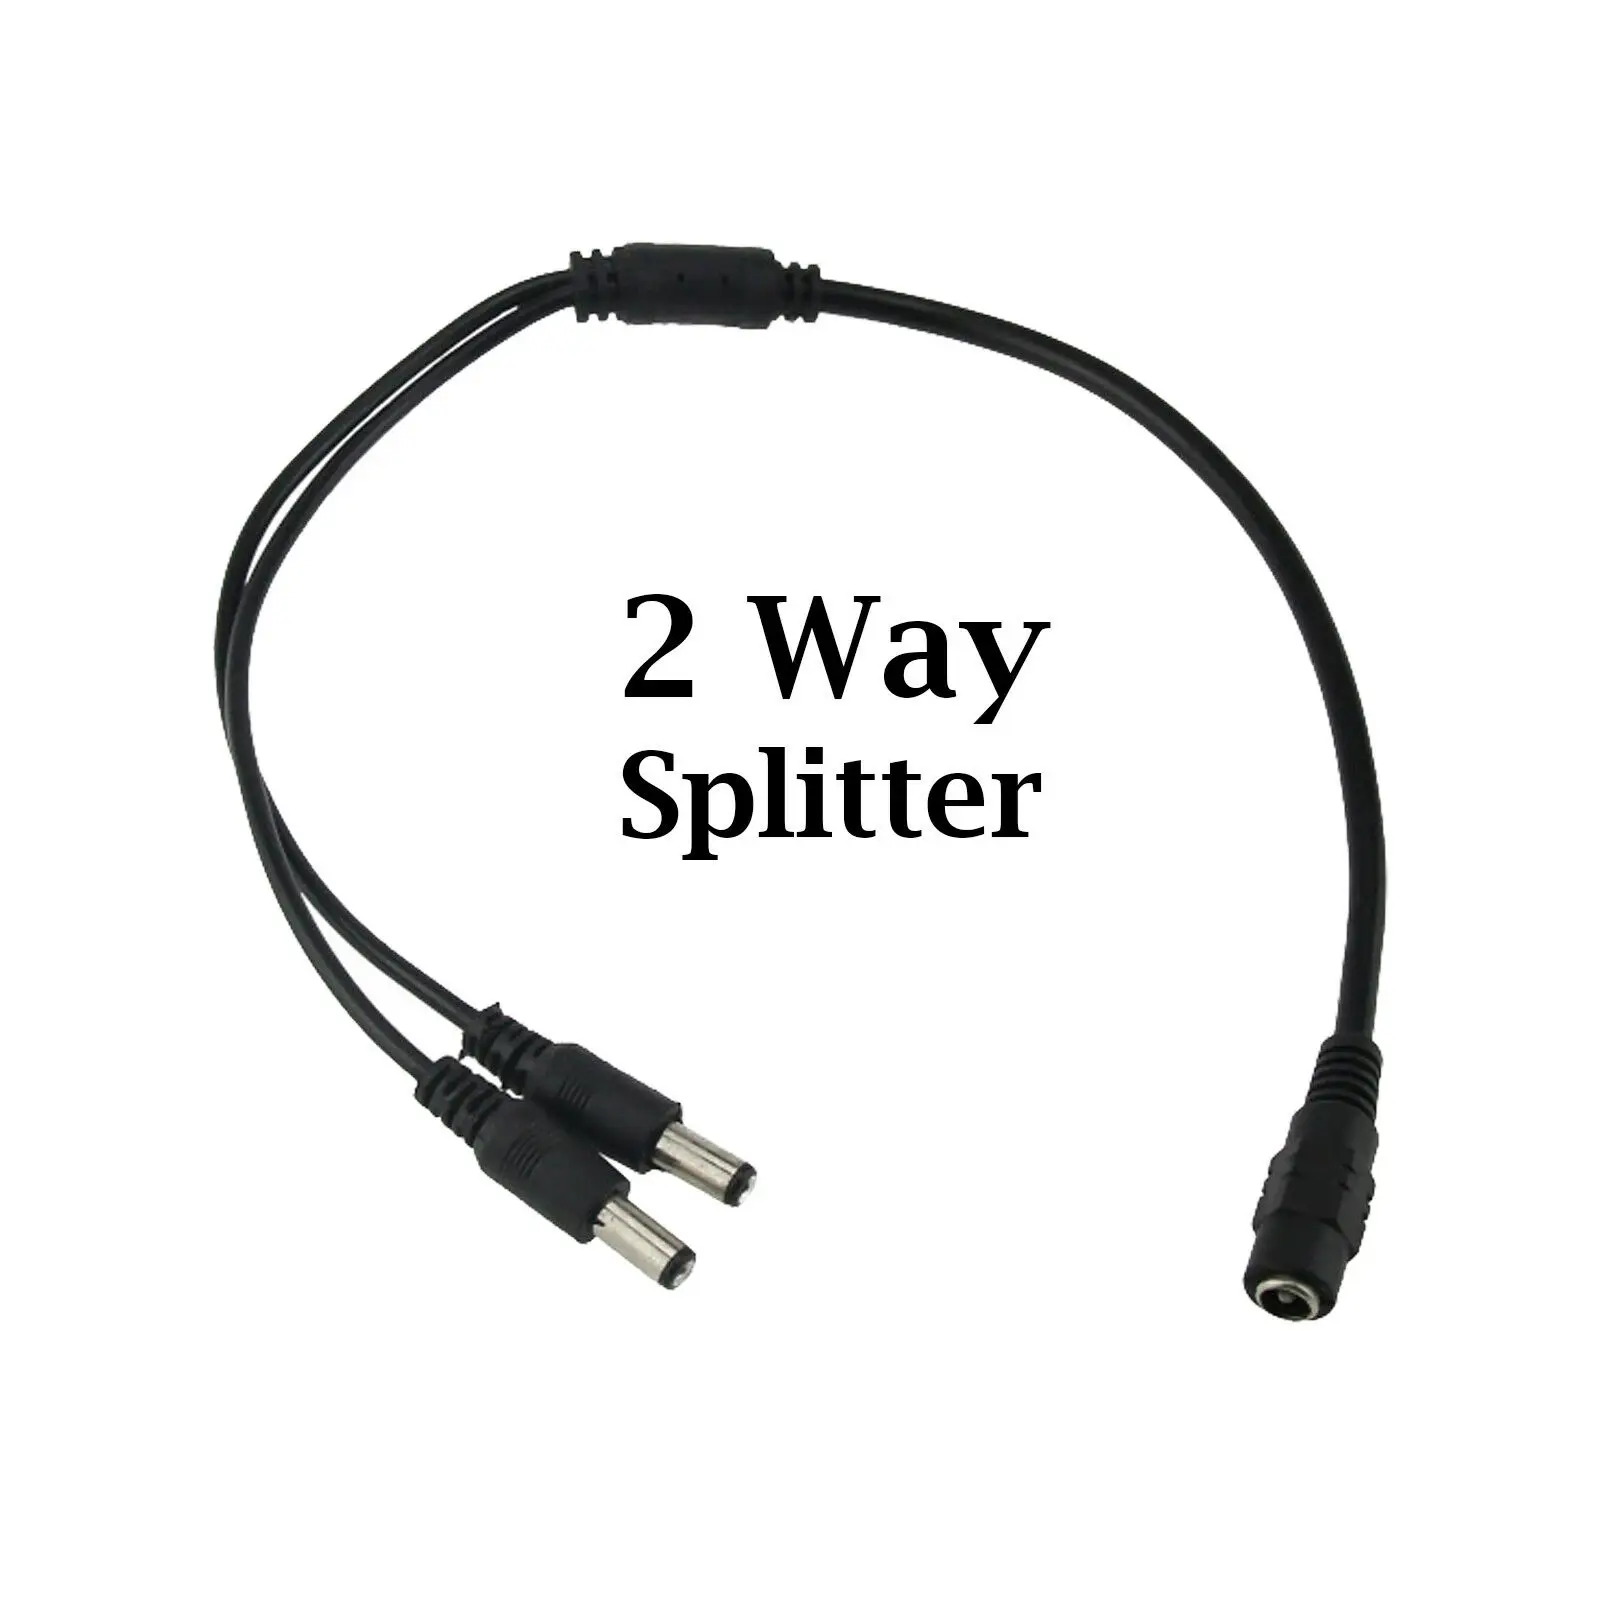 2 4 6 8 Way CCTV DC Power Splitter Adapter Cable for 12V 9V PSU Security Camera